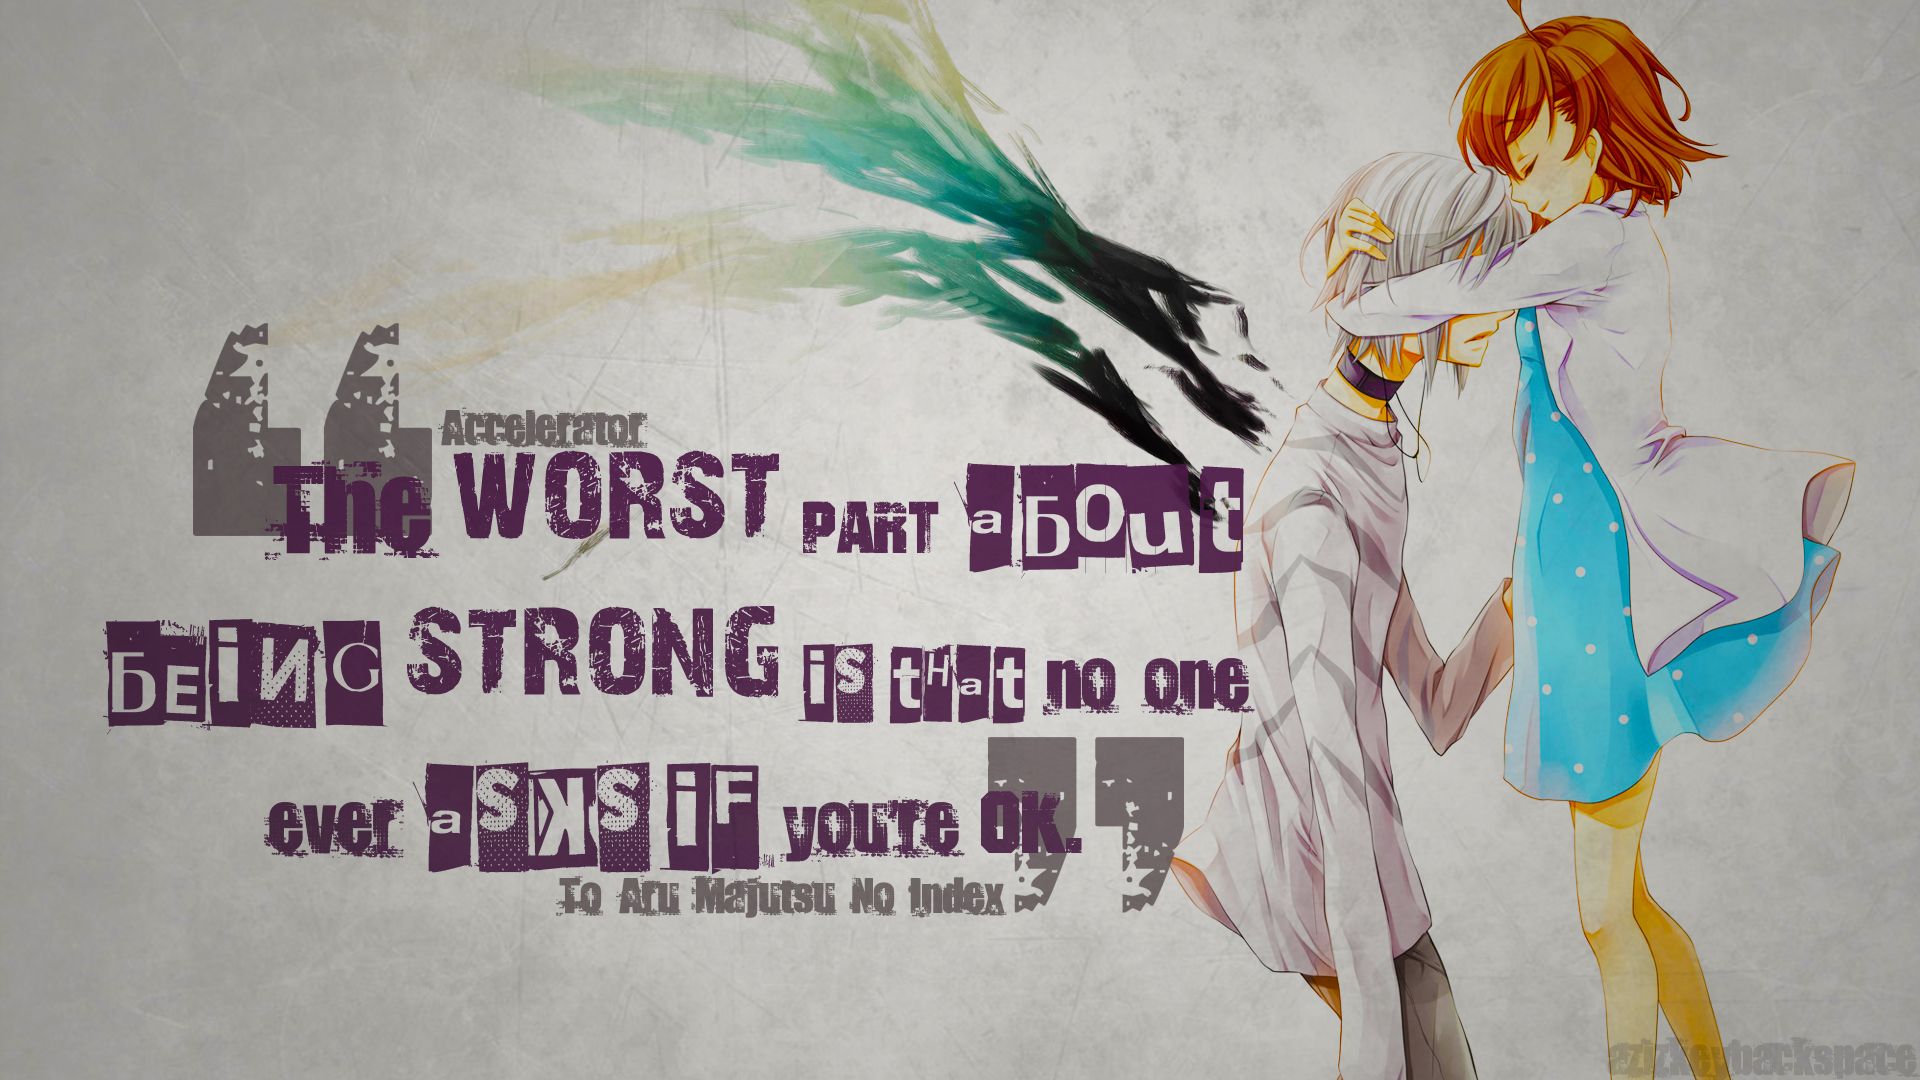 Sad Anime Quotes Wallpapers - Wallpaper Cave